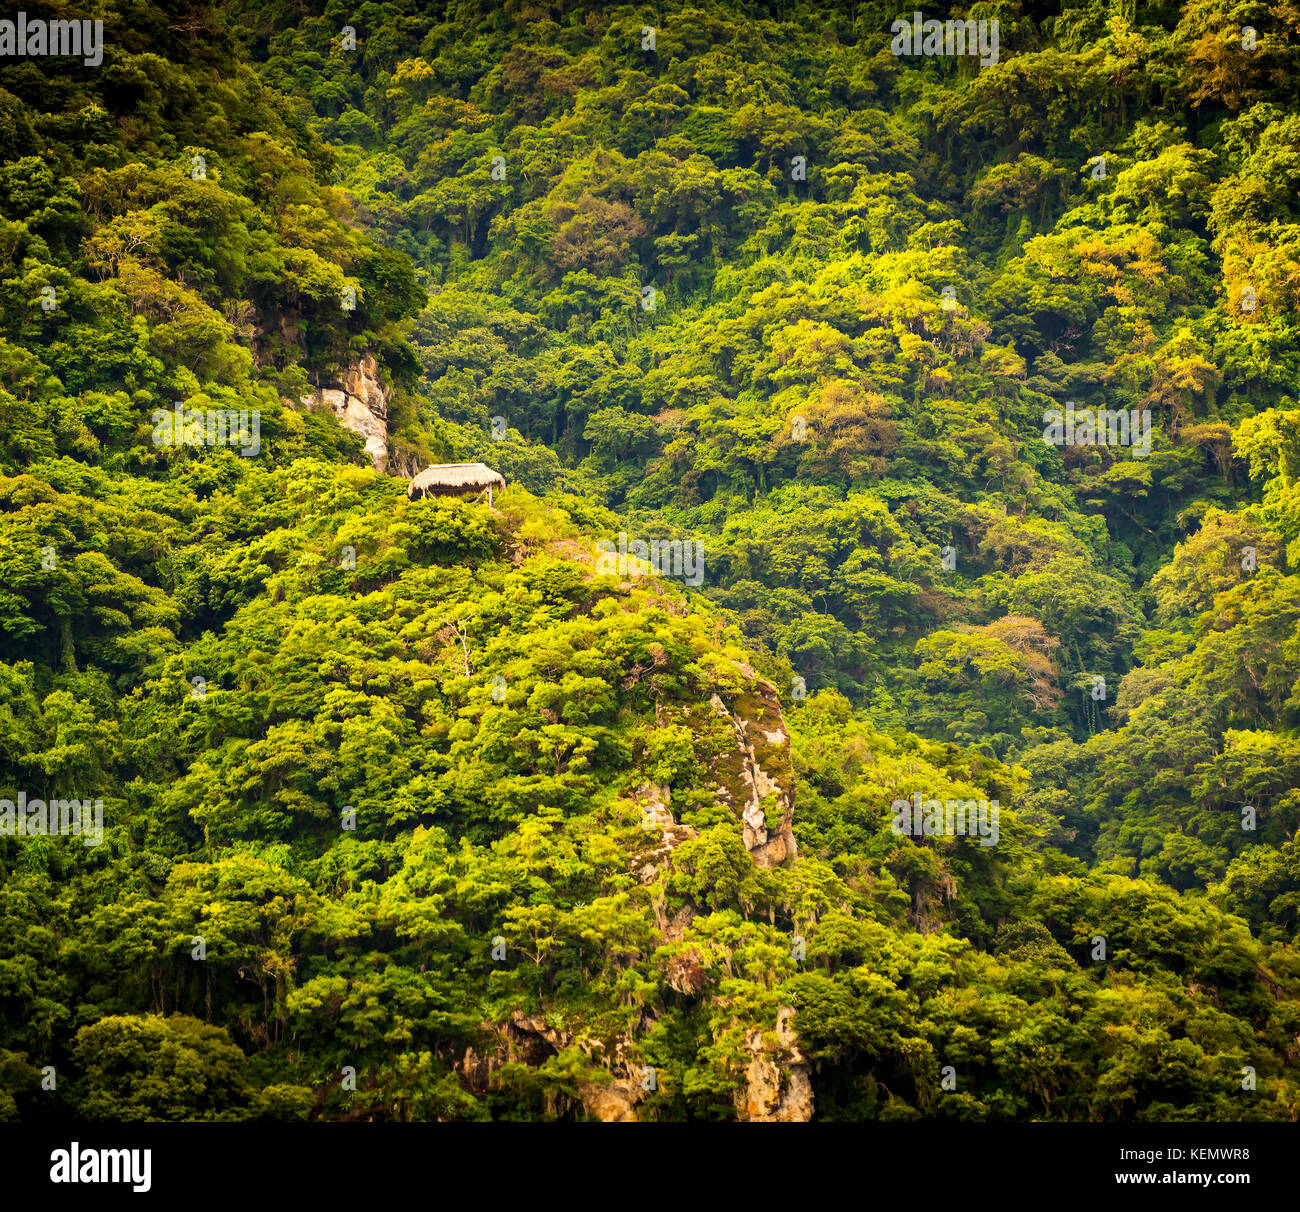 Hut on Lake Atitlan hillside in the forest Stock Photo